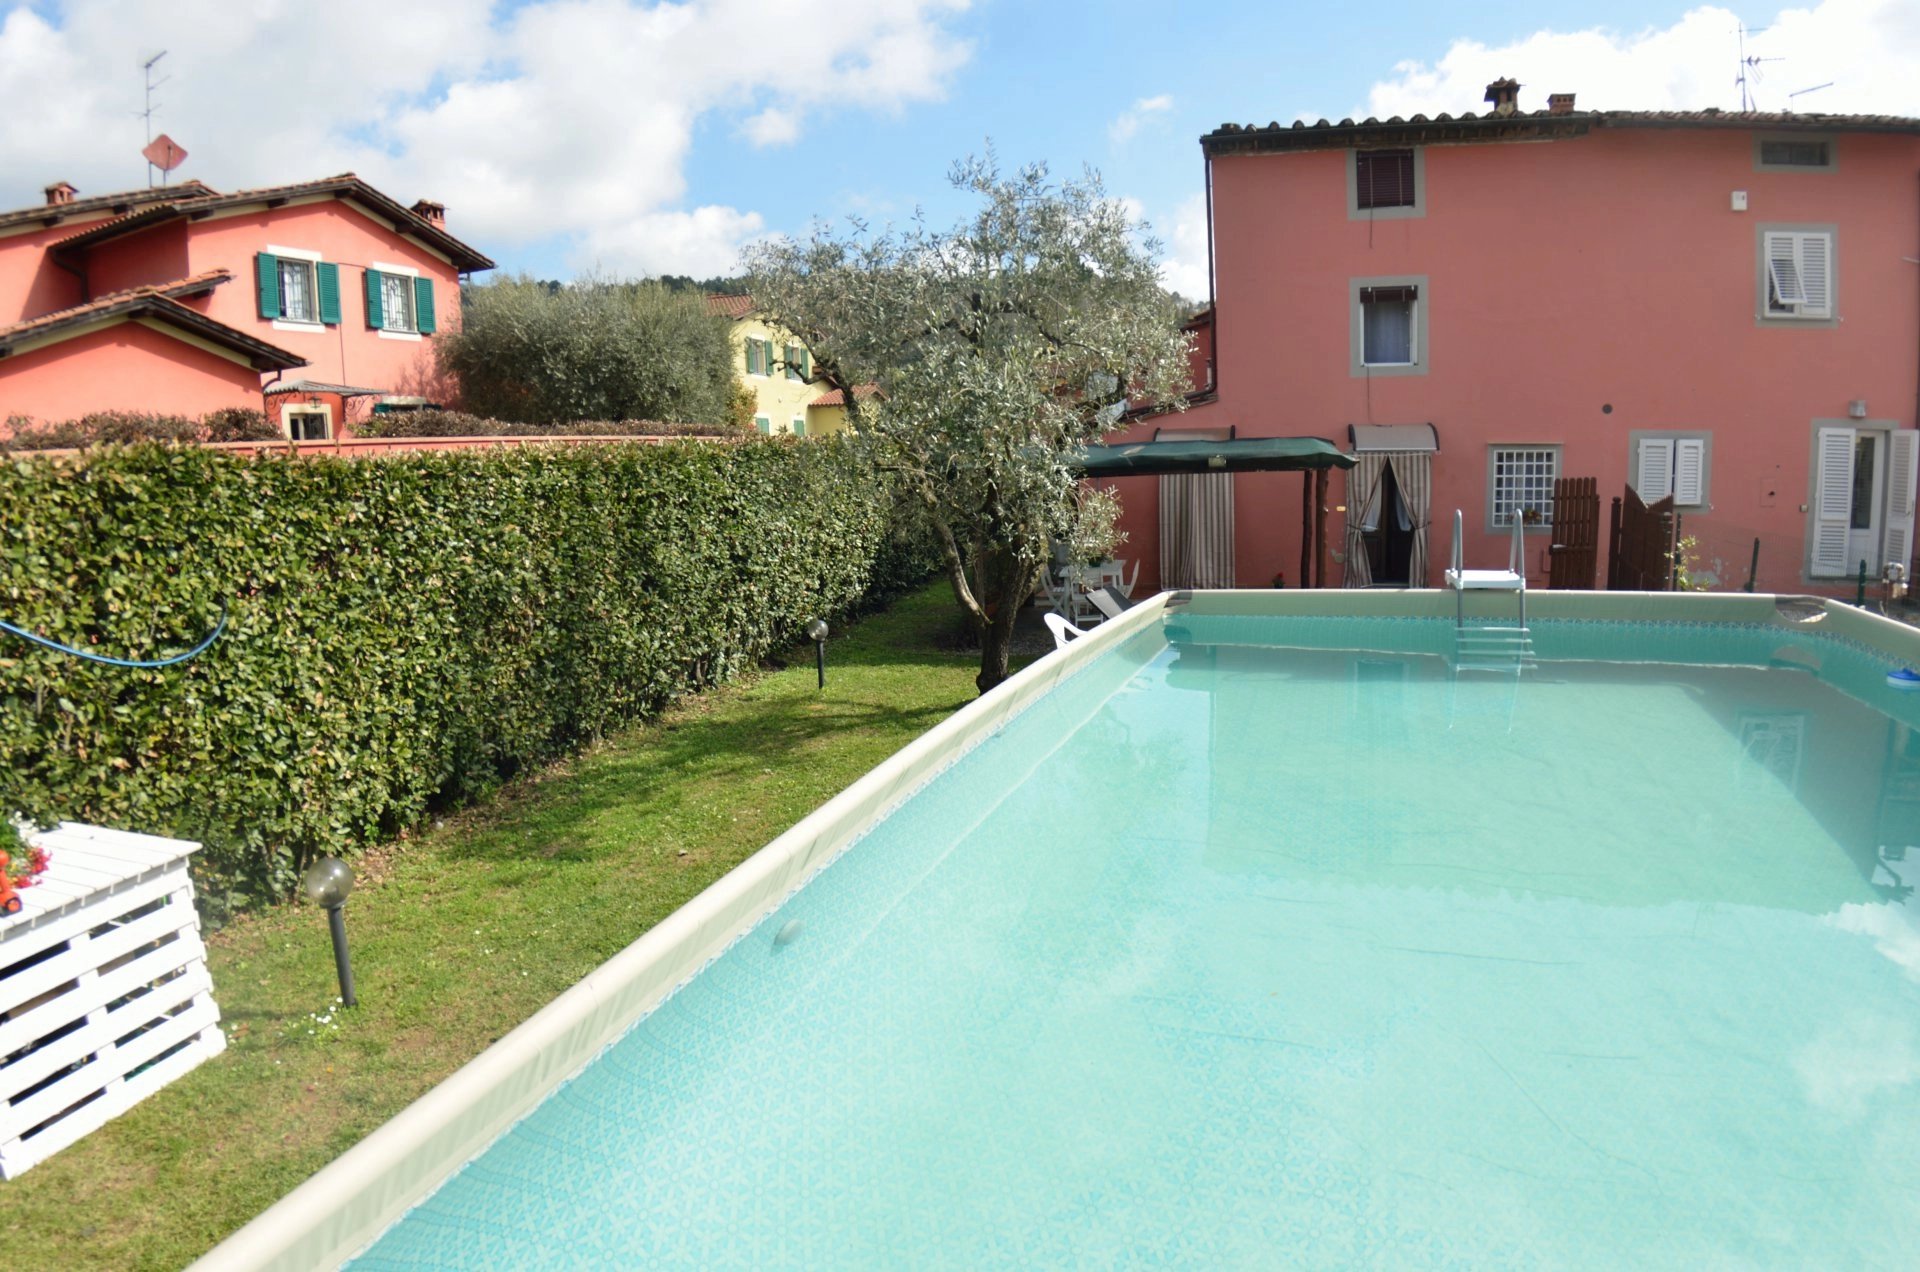 ITALY, TUSCANY, LUCCA, HOUSE WITH POOL,  FROM EURO 390 PR WEEK, 6 PERSONS